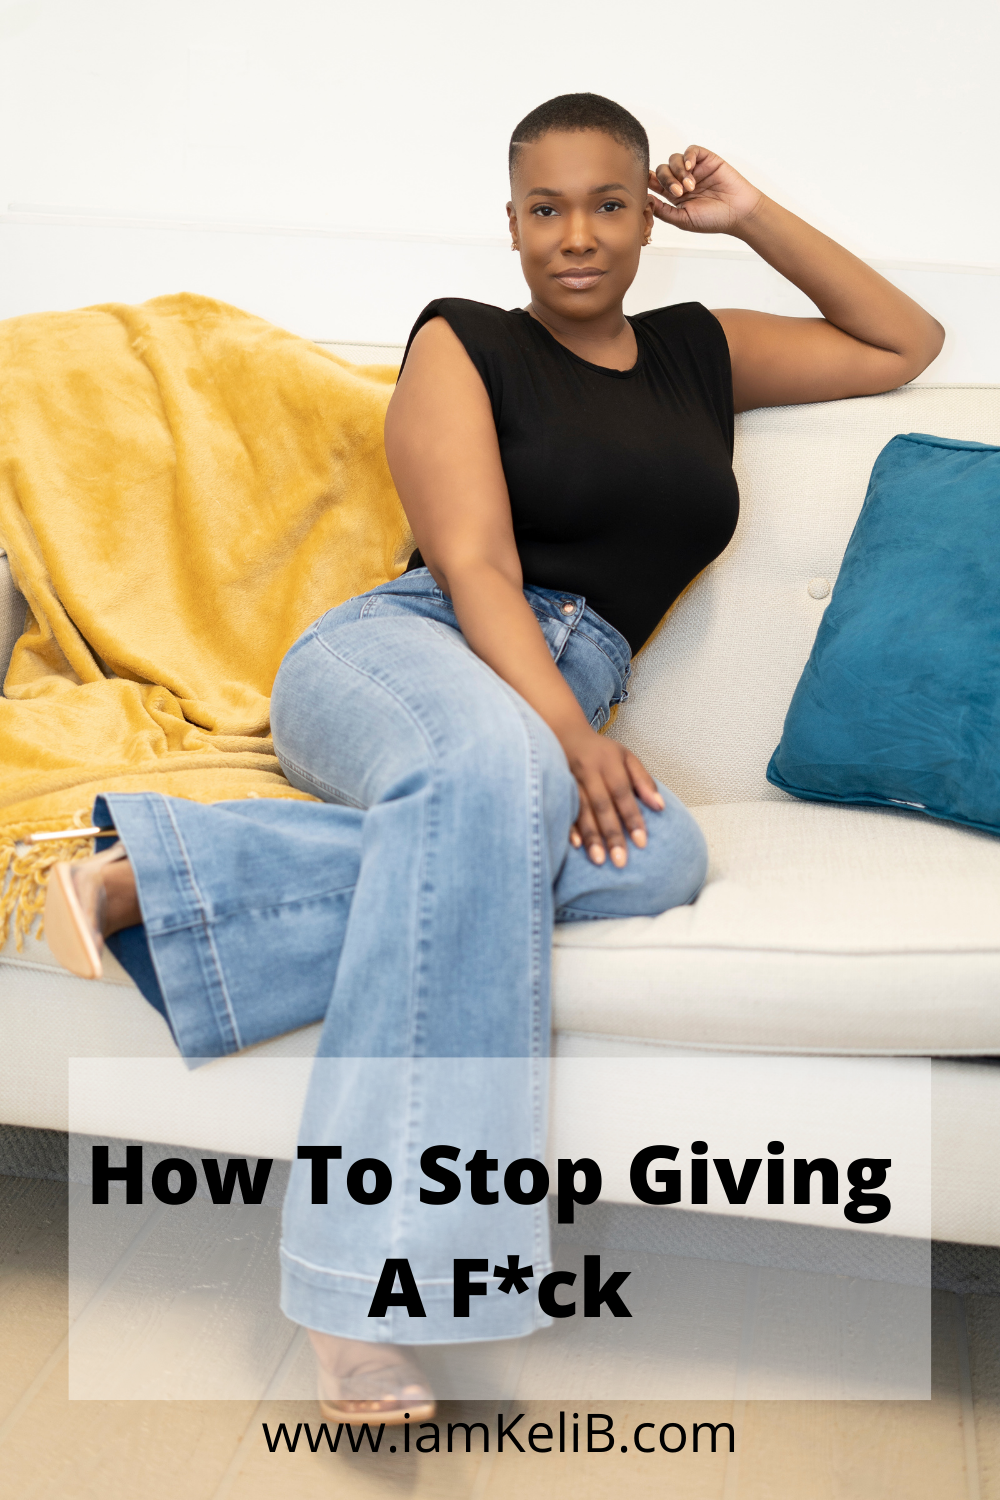 How To Stop Giving A F*ck